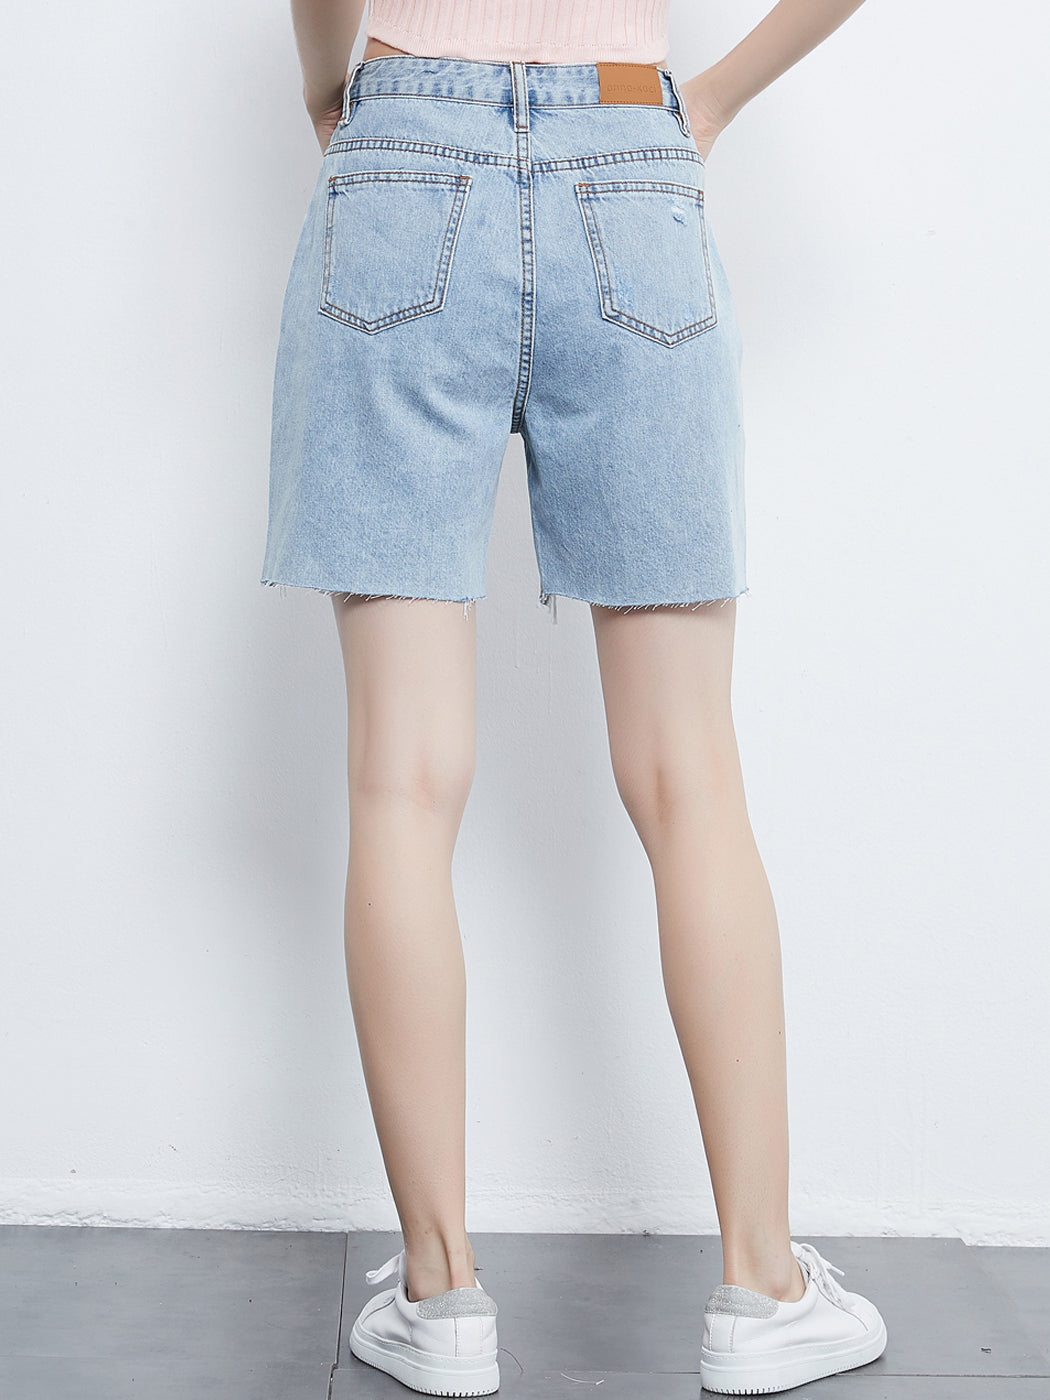 Ripped Denim Jean Shorts with Pockets